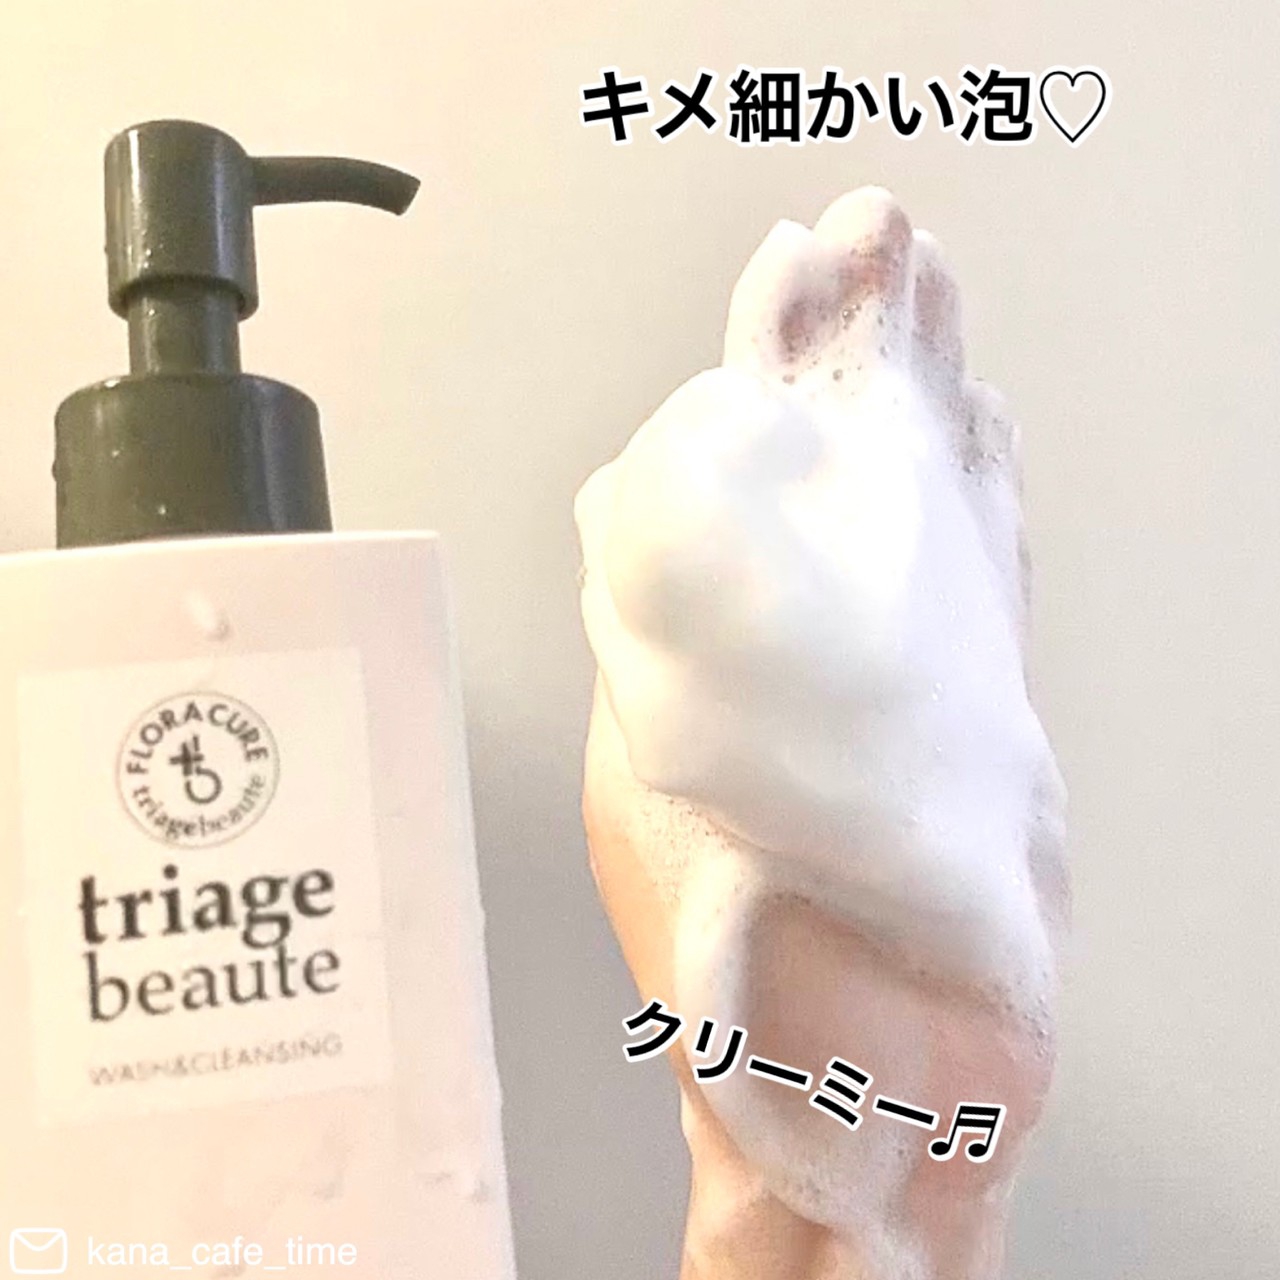 triagebeaute FLORA CURE WASH ＆ CLEANSINGを使ったkana_cafe_timeさんのクチコミ画像4